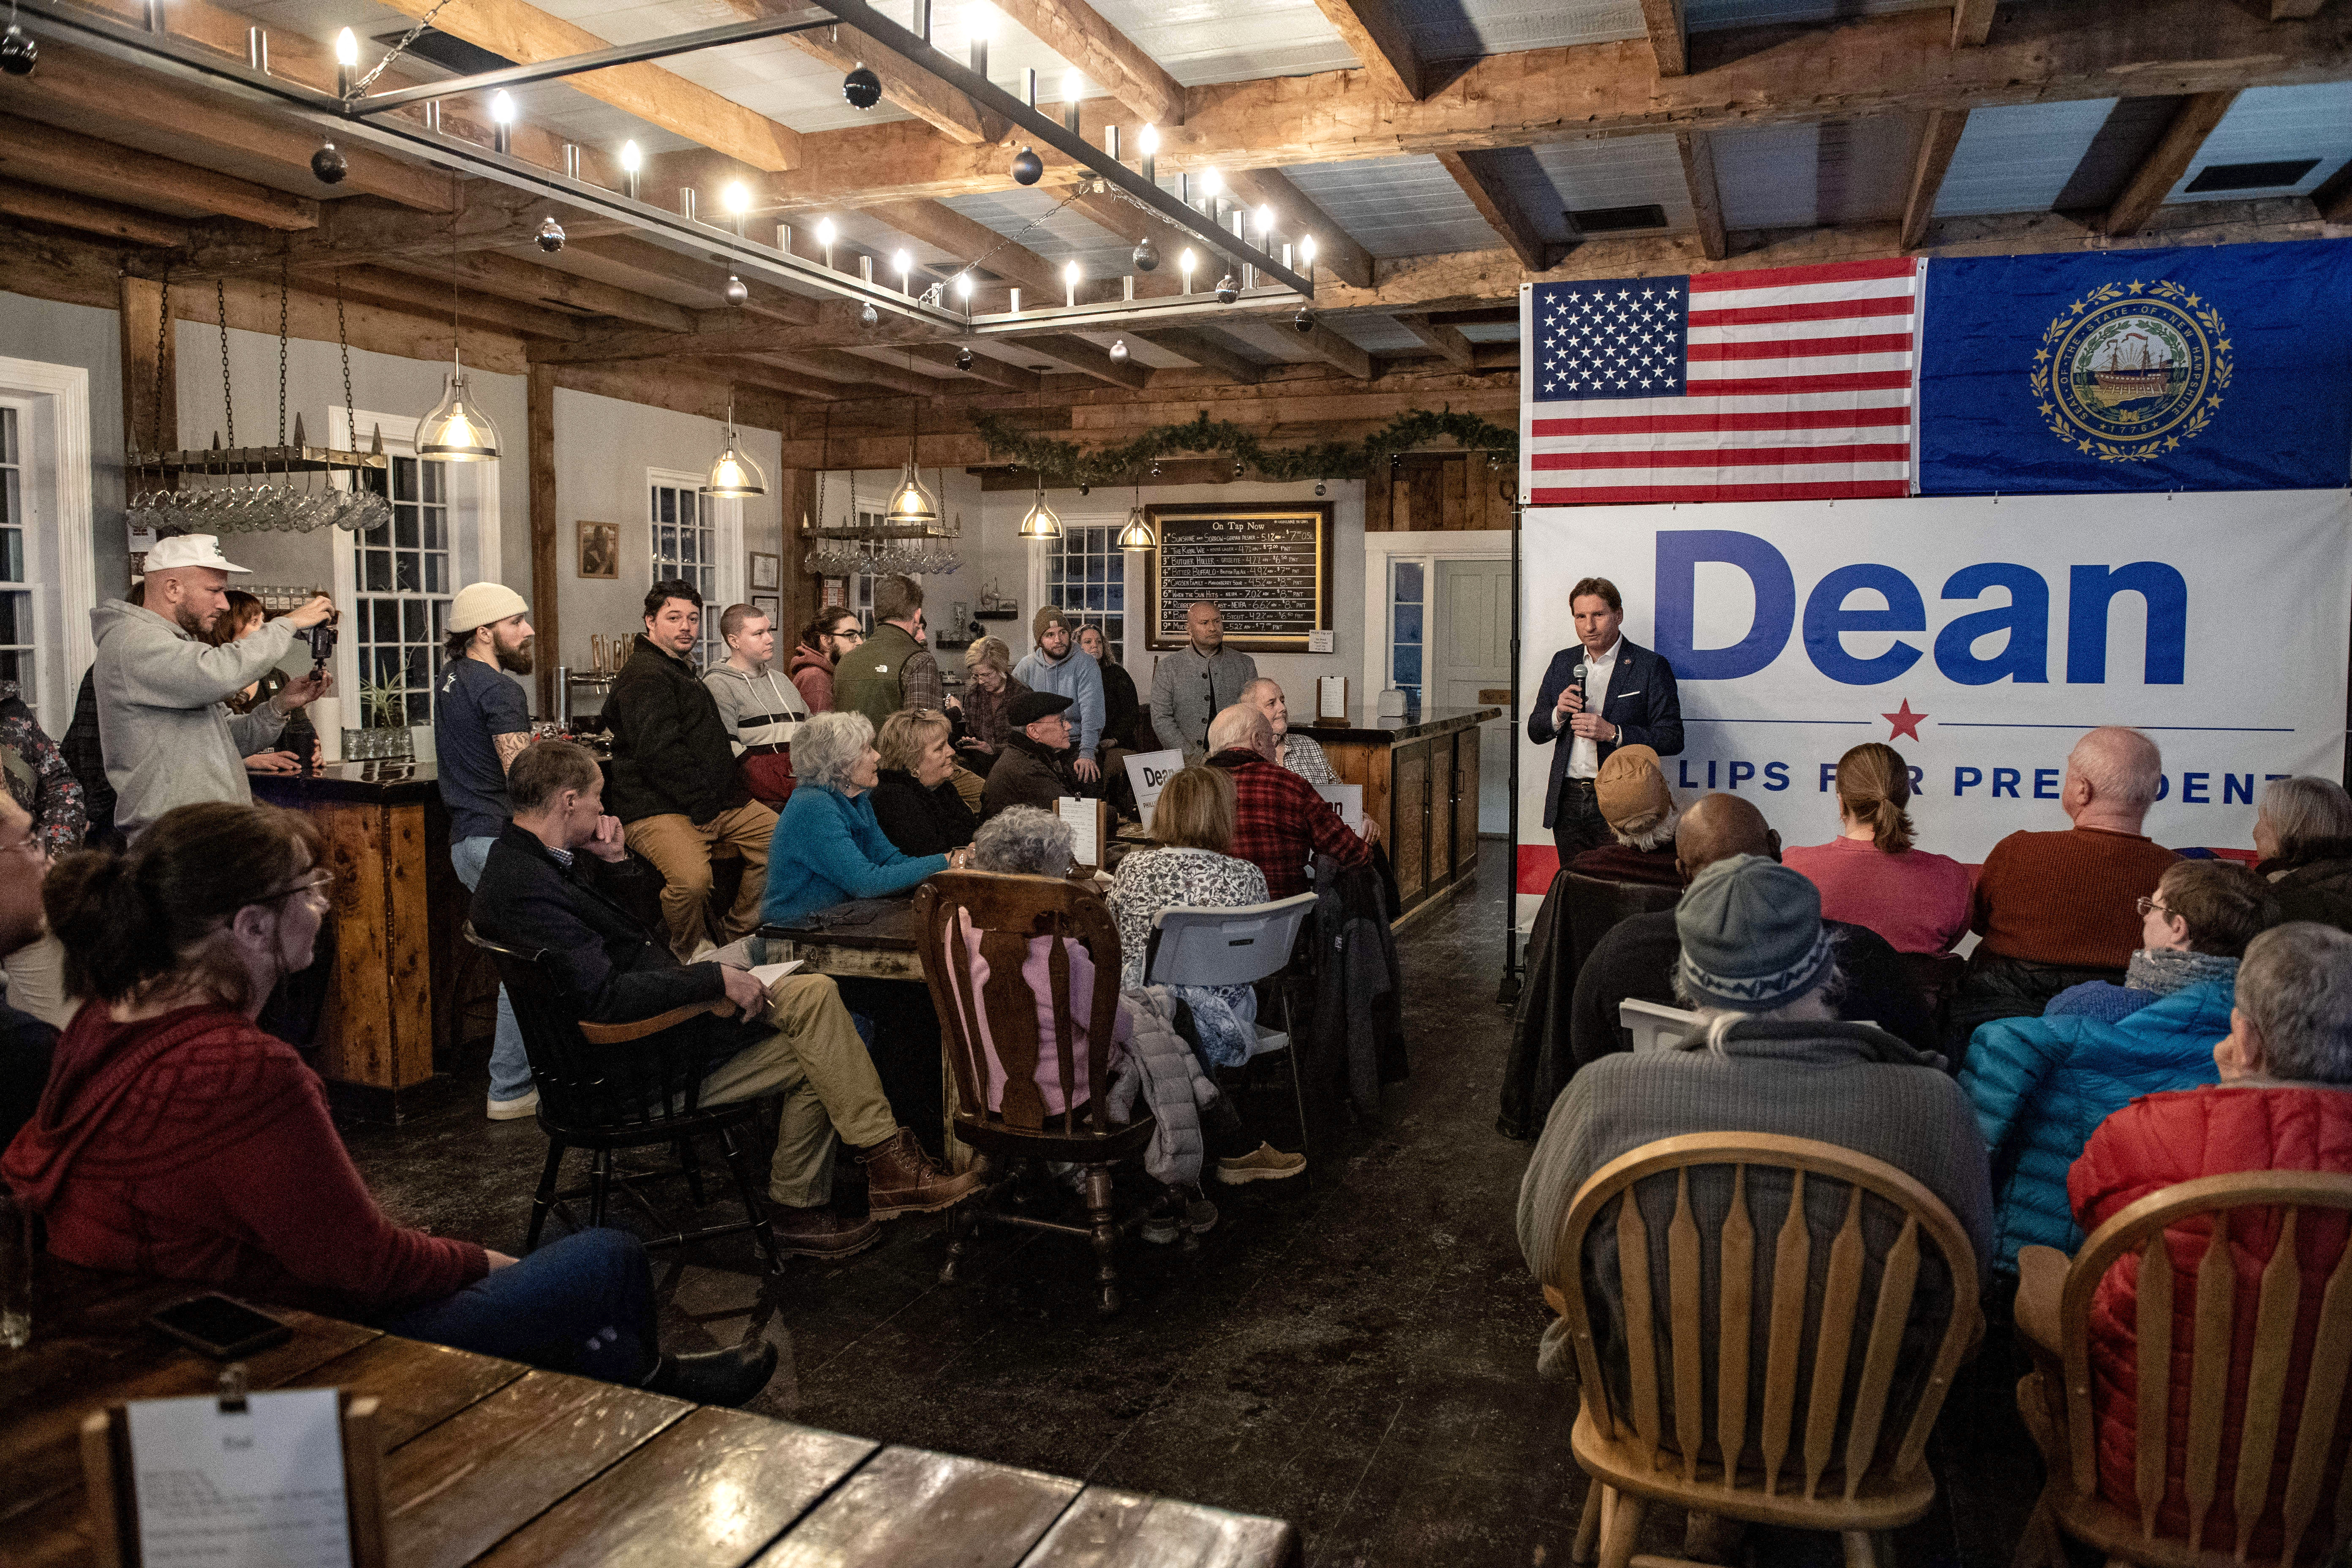 Minnesota Rep. Dean Phillips speaks during a campaign event at Post & Beam Brewing in Peterborough, New Hampshire, on January 17.